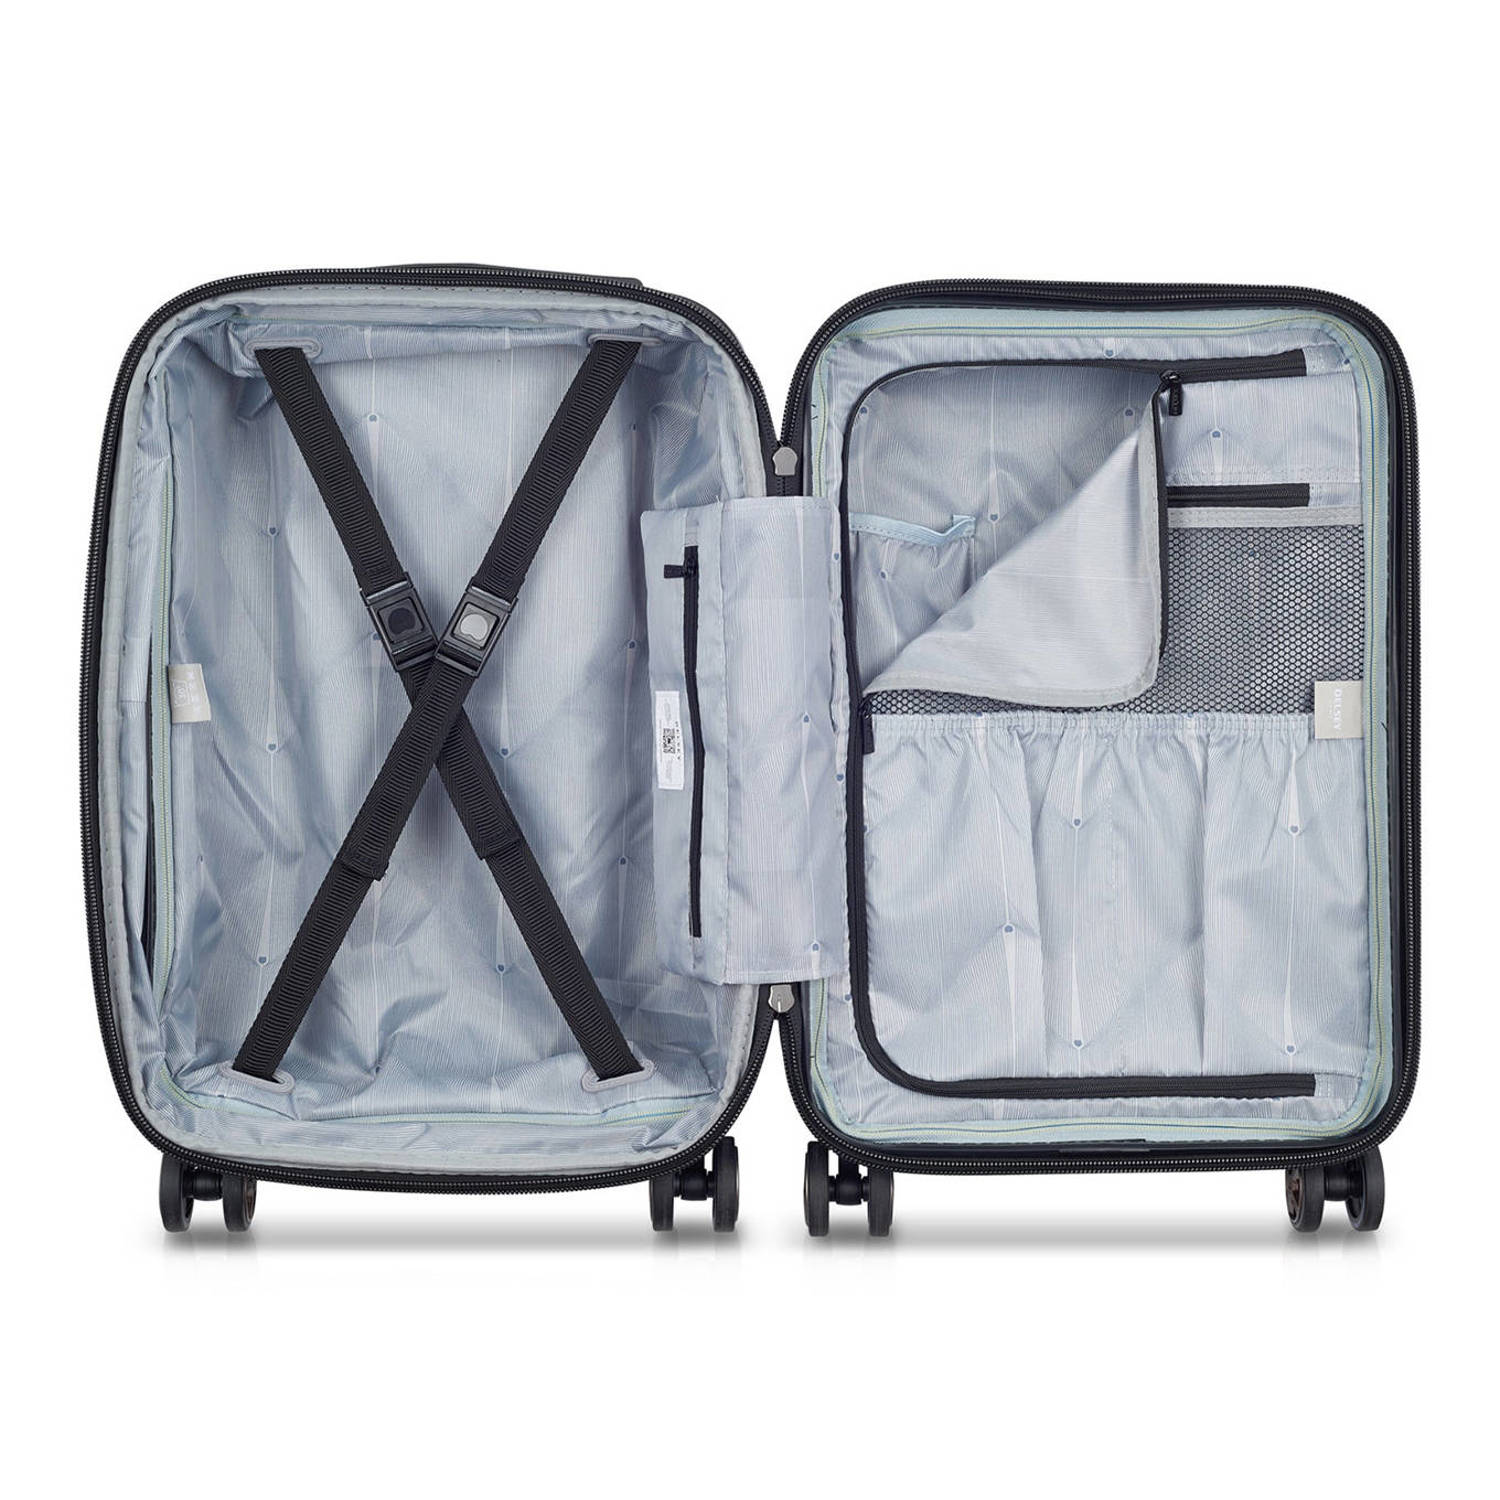 Delsey trolley Shadow 5.0 55 cm. Expandable zwart